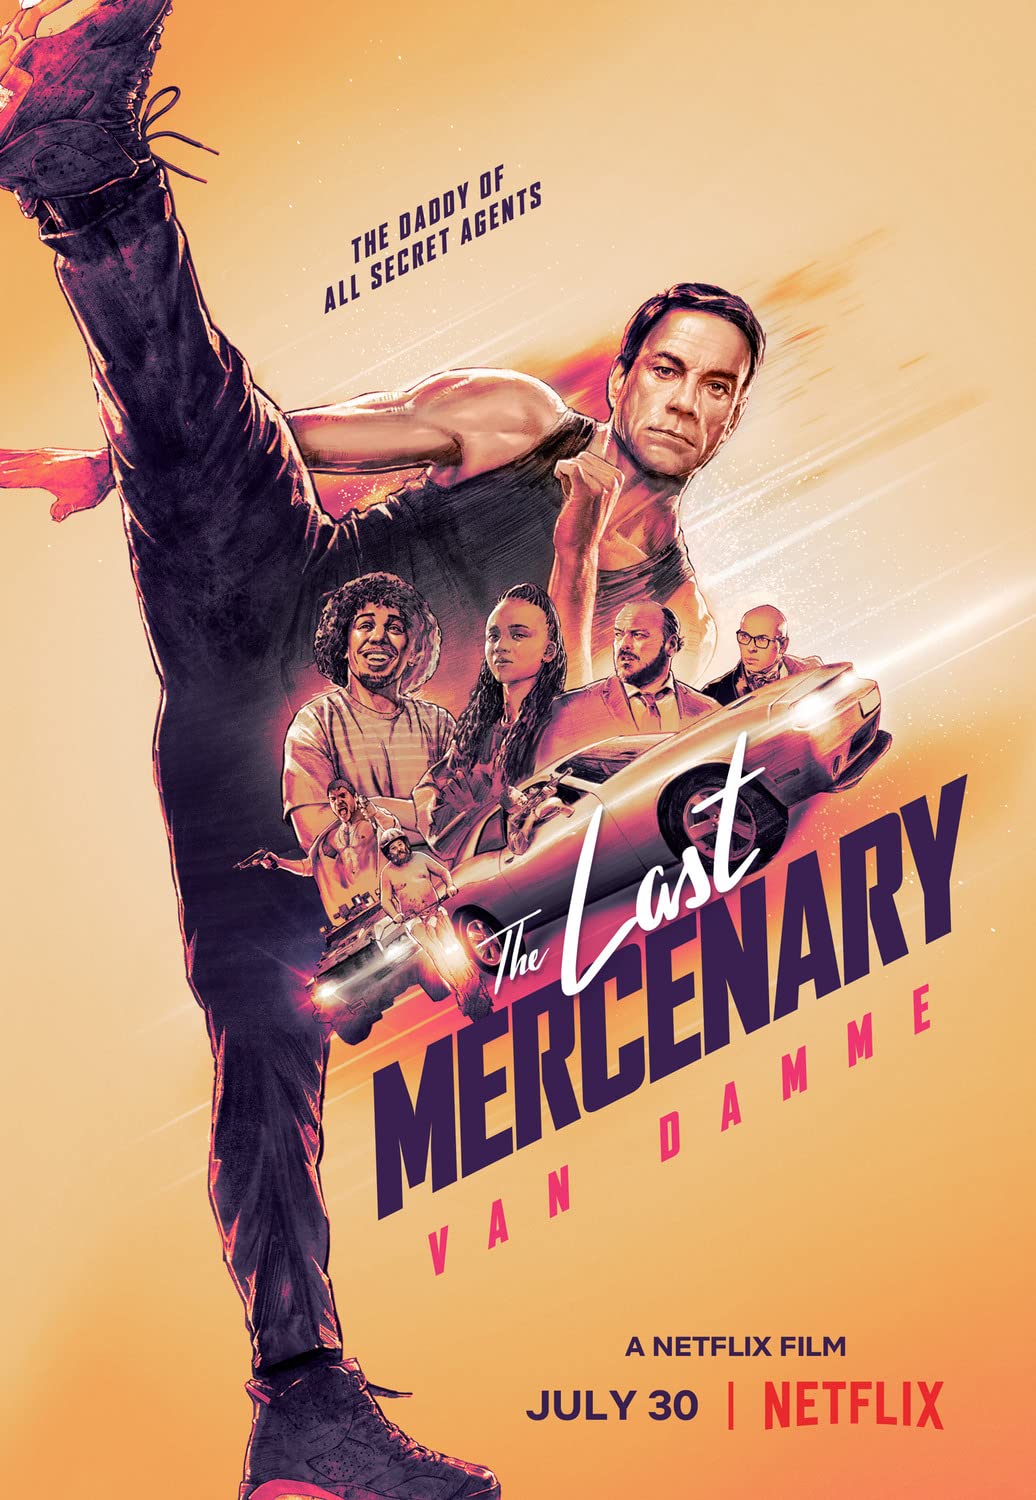 The Last Mercenary Official Trailer Netflix, Coming to Netflix in July 2021